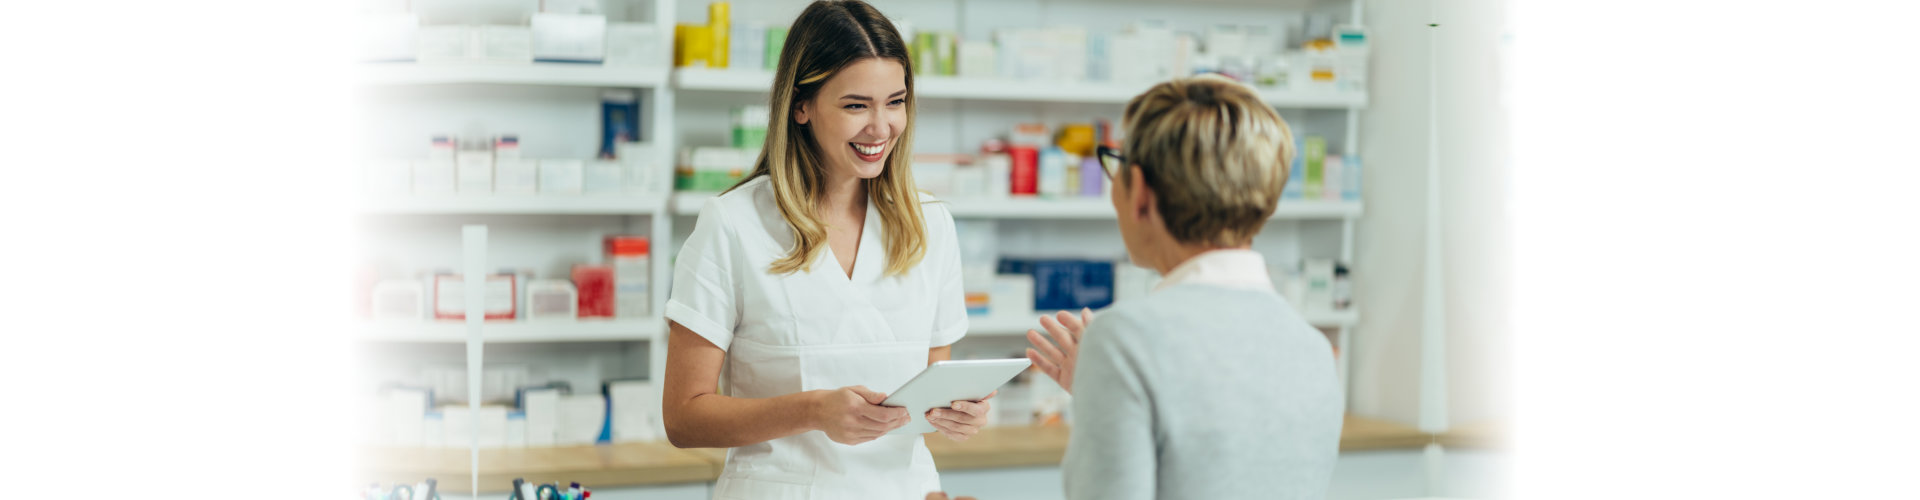 female pharmacist selling medications at drugstore to a senior woman customer